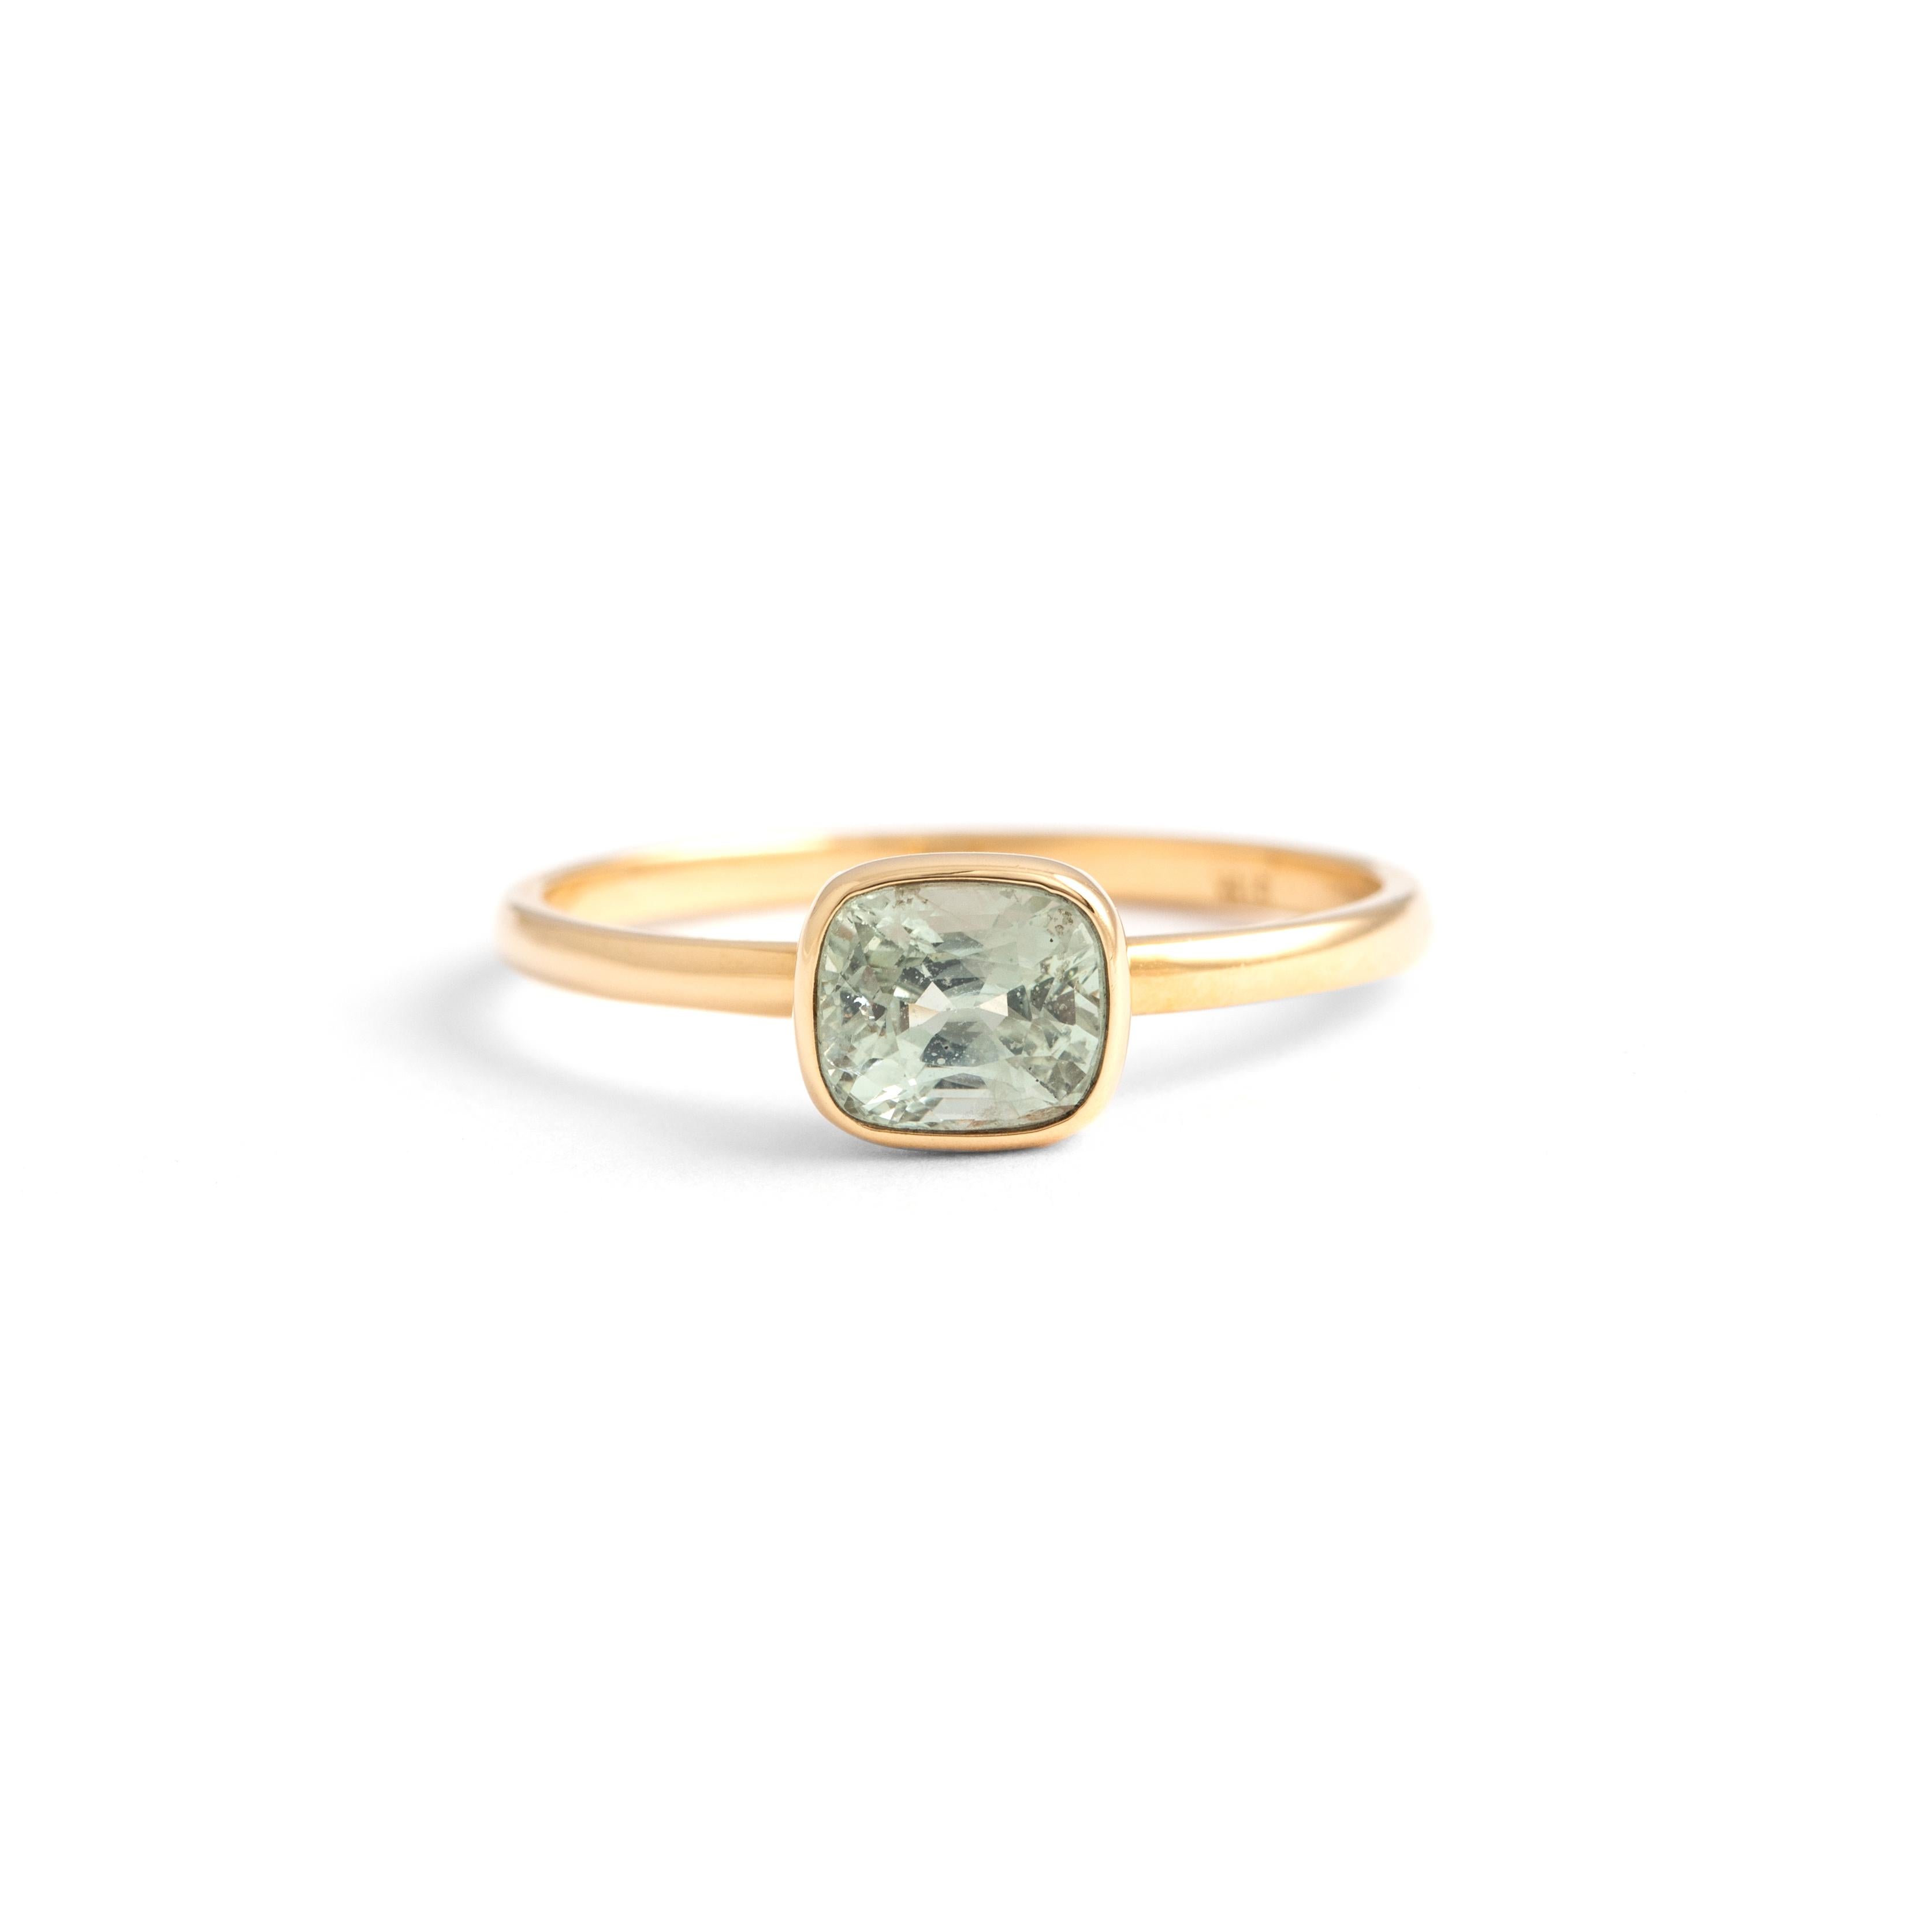 Solitaire 18K Yellow Gold Ring.
Total weight: 1.79 grams.